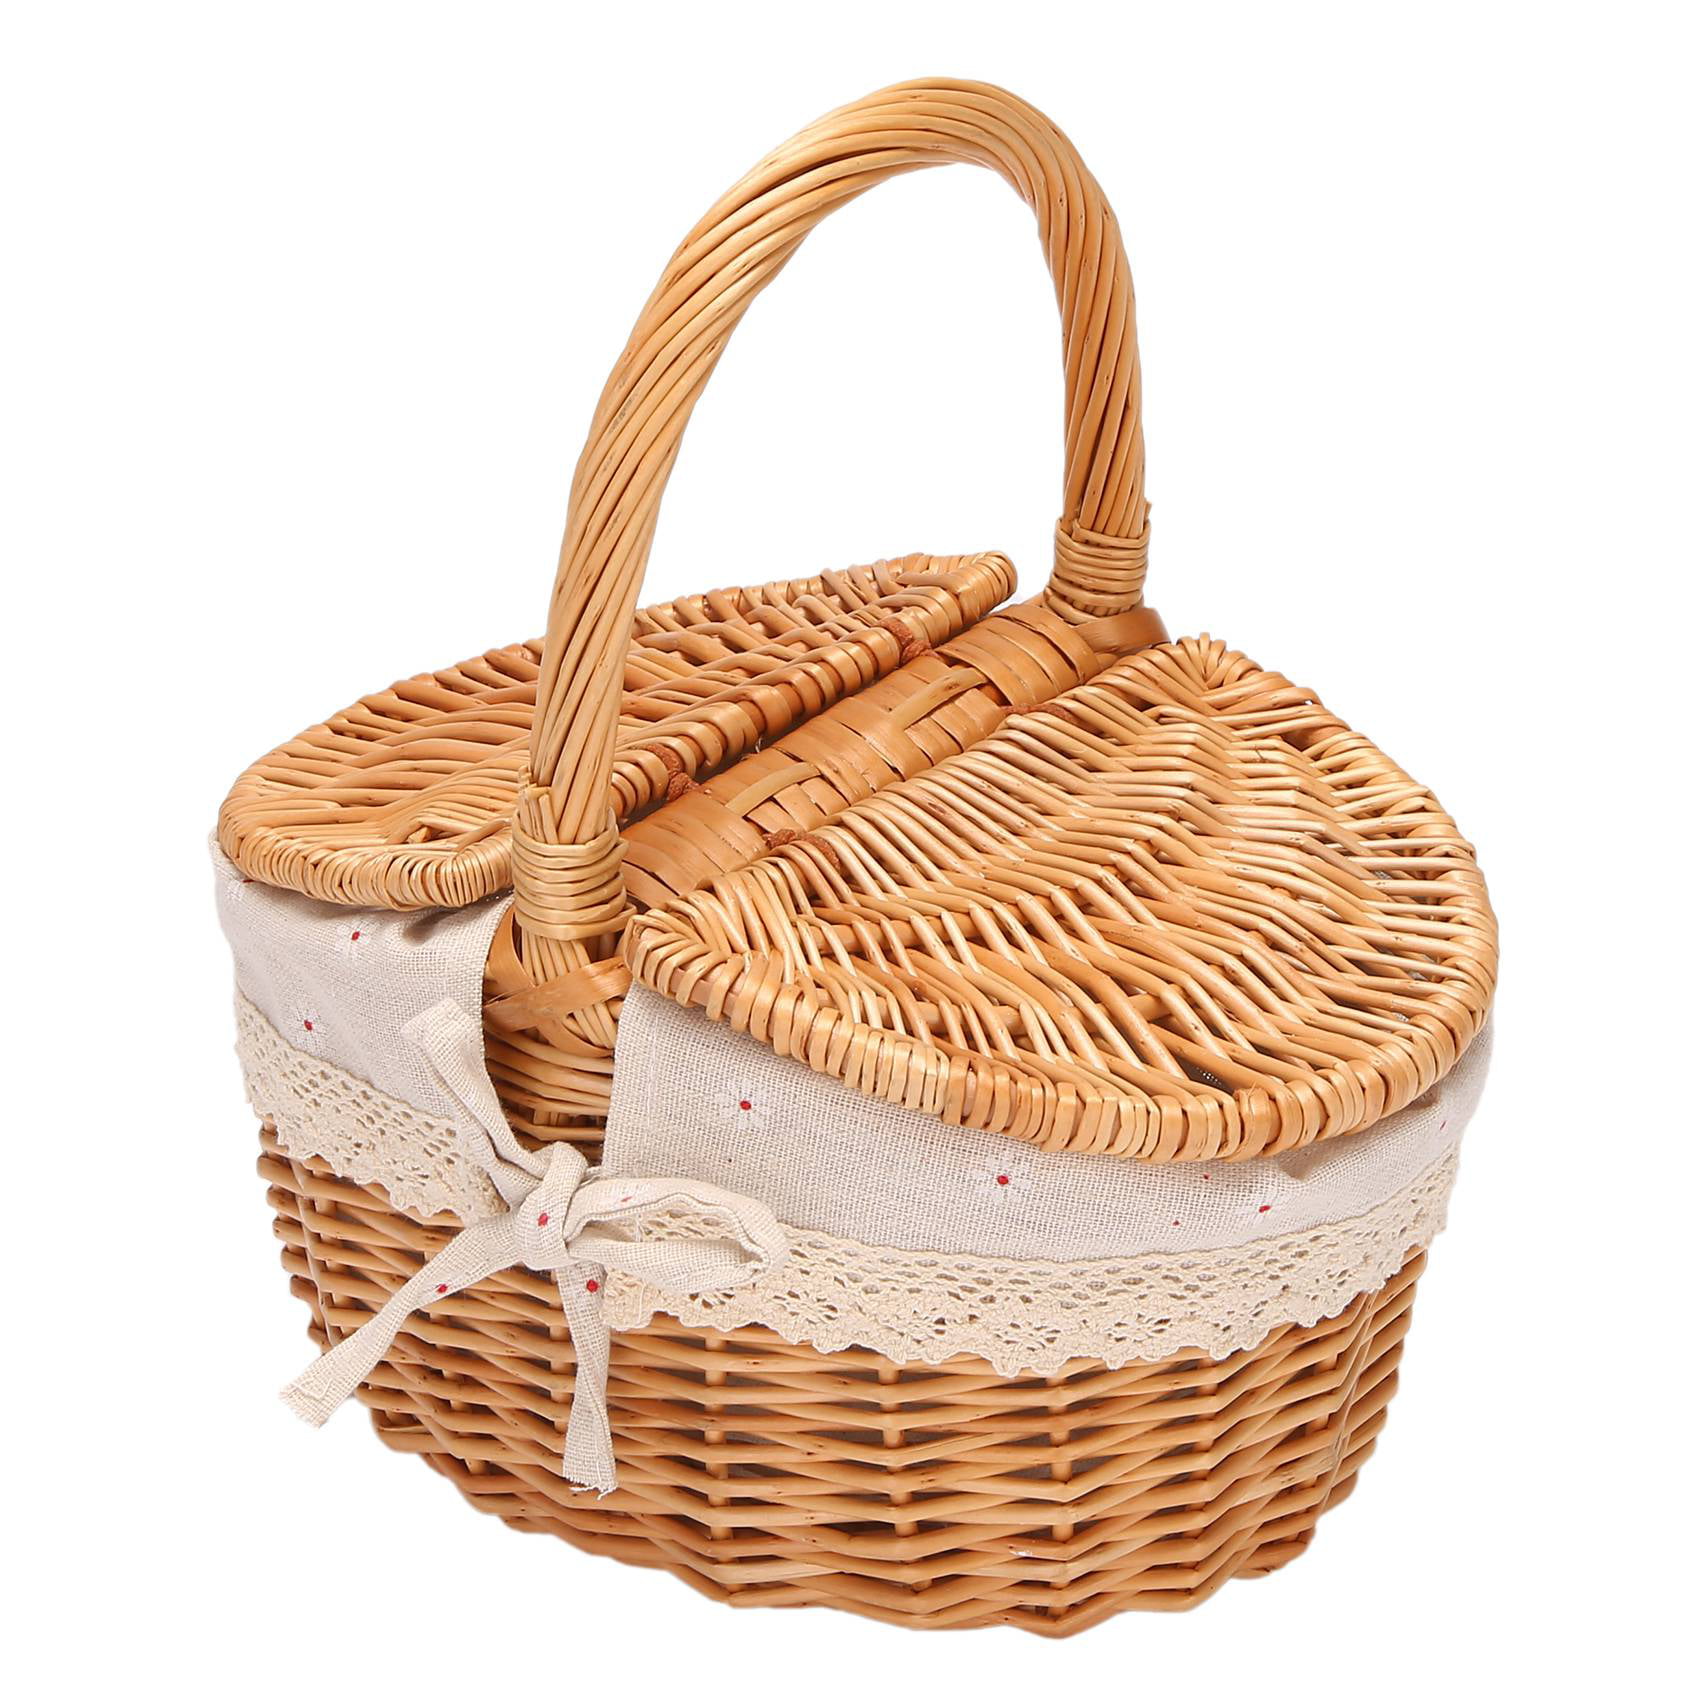 TTBD Handmade Wicker Basket with Handle Wicker Camping Picnic Basket with Double Lids Storage Hamper Basket with Cloth Lining 